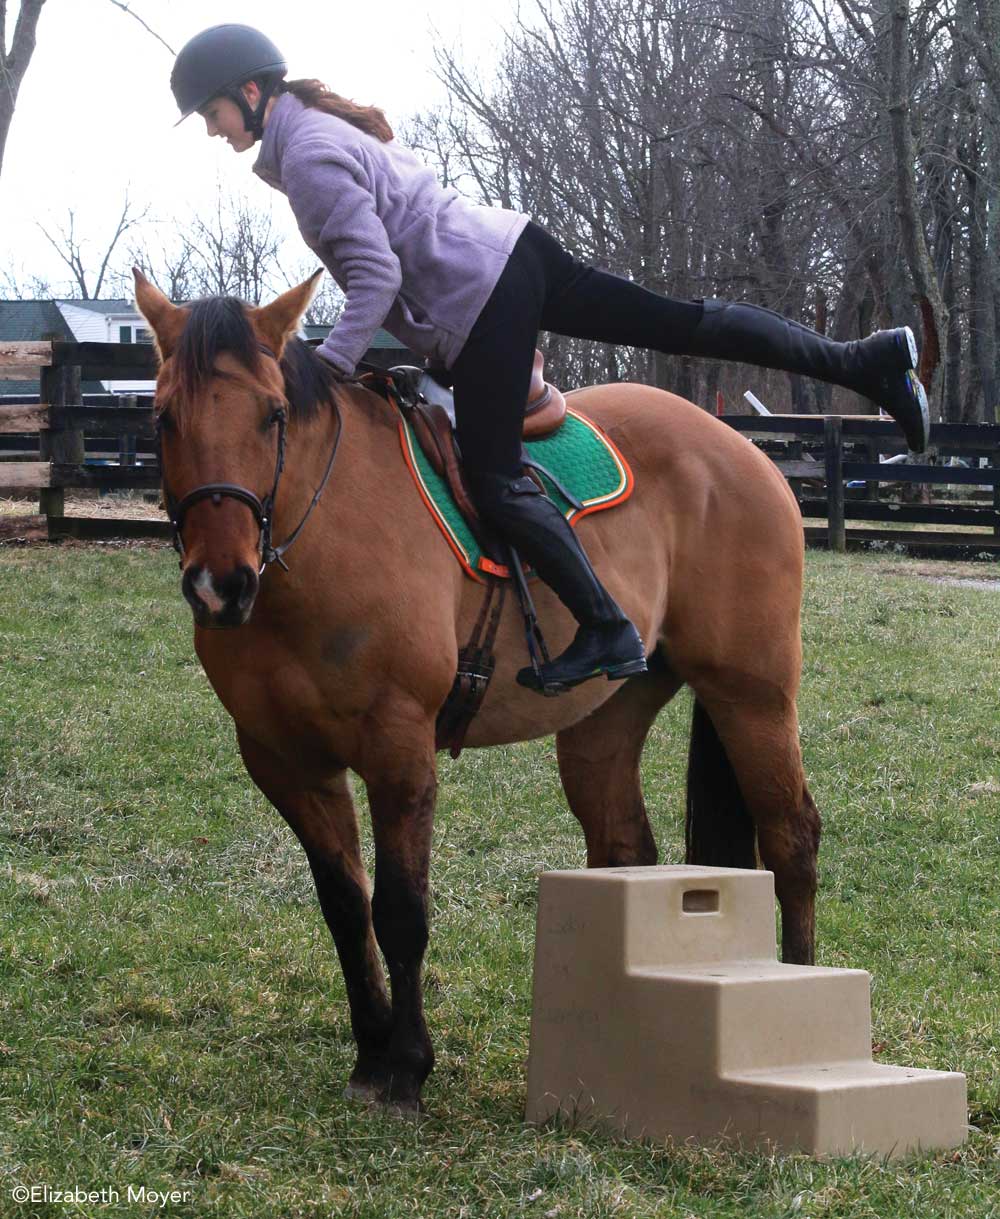 Rider mounting a horse from a mounting block